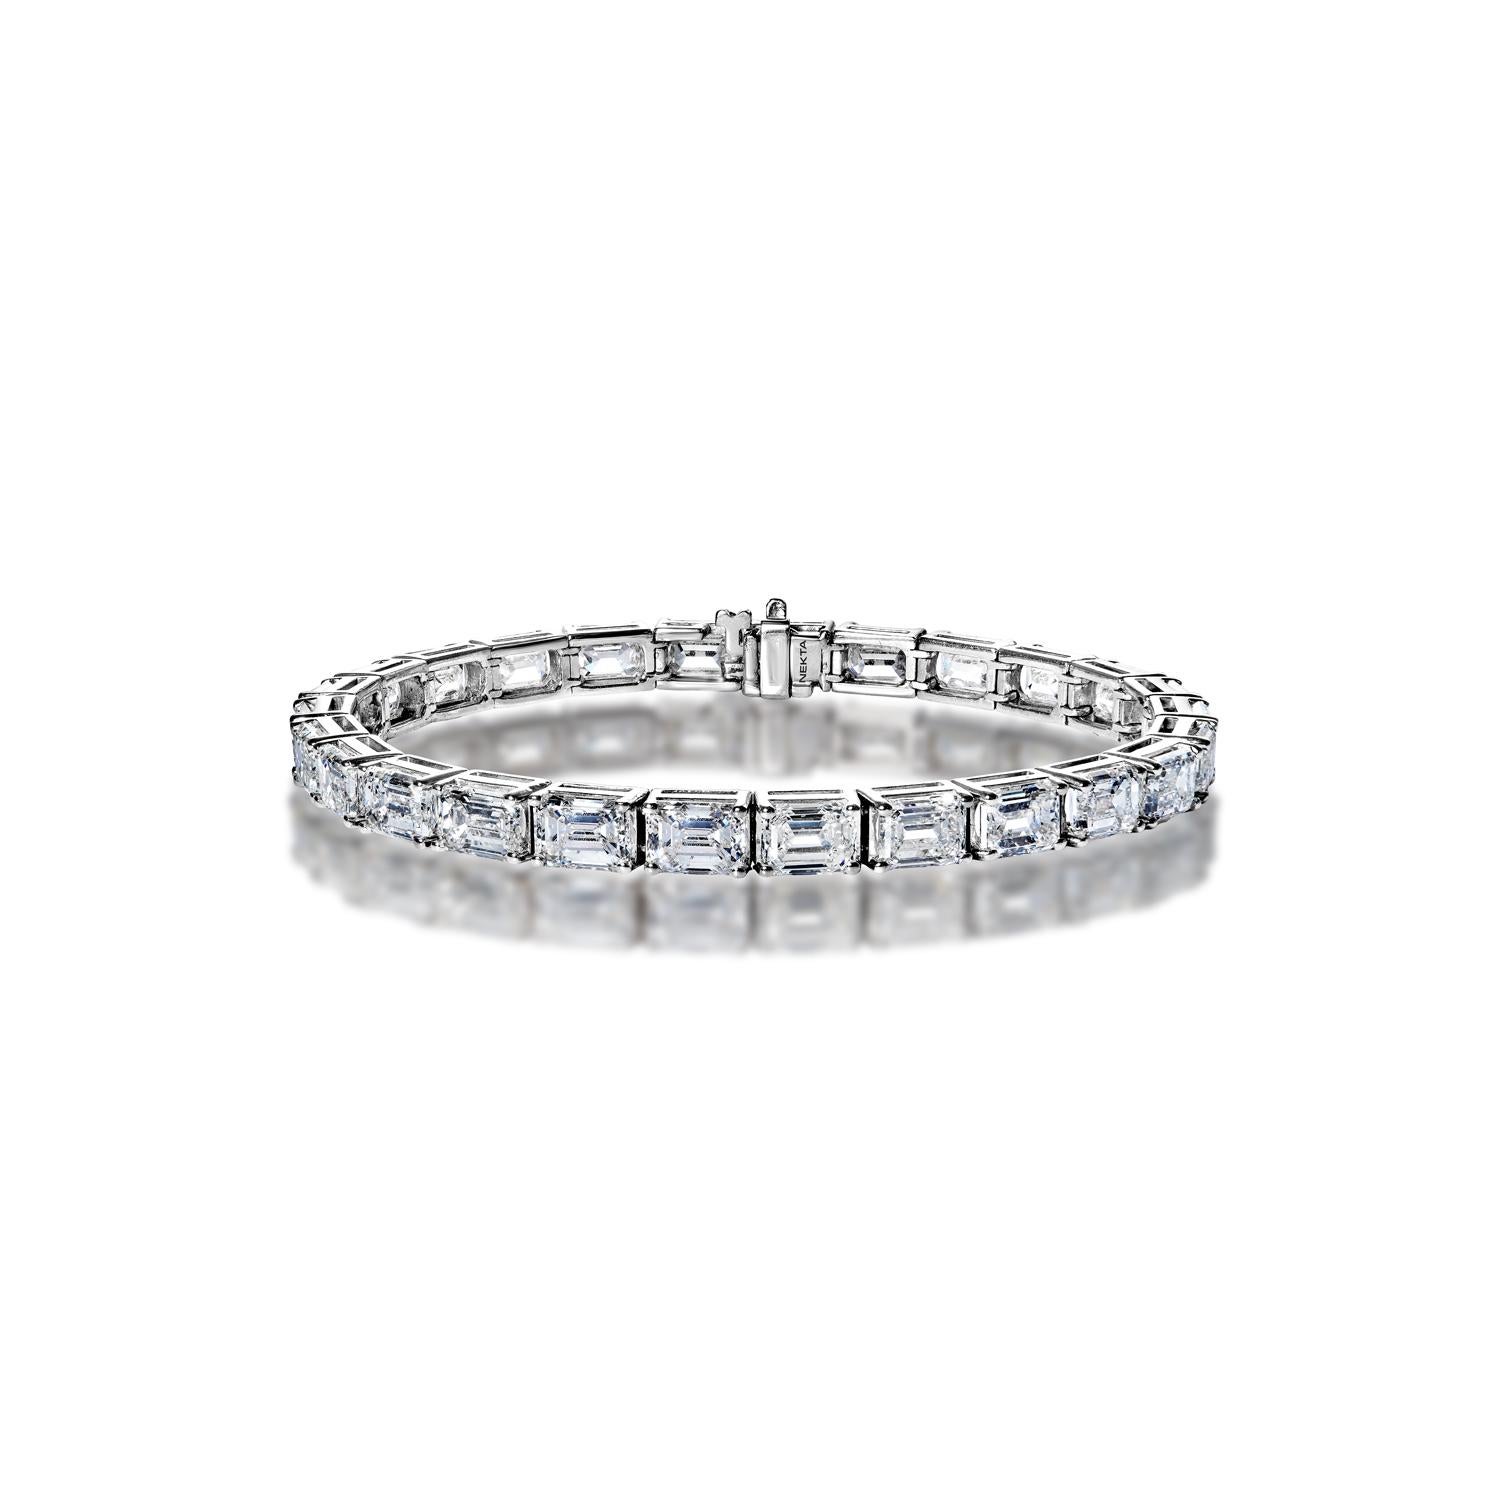 The EVERT Emerald Cut InLine 4 prong Set Diamond Tennis Bracelet features twenty six 1 carat diamonds weighing a total of approximately 26 carats, set in the metal of your choice.  This Bracelet can be costumed made in the  the metal and diamond